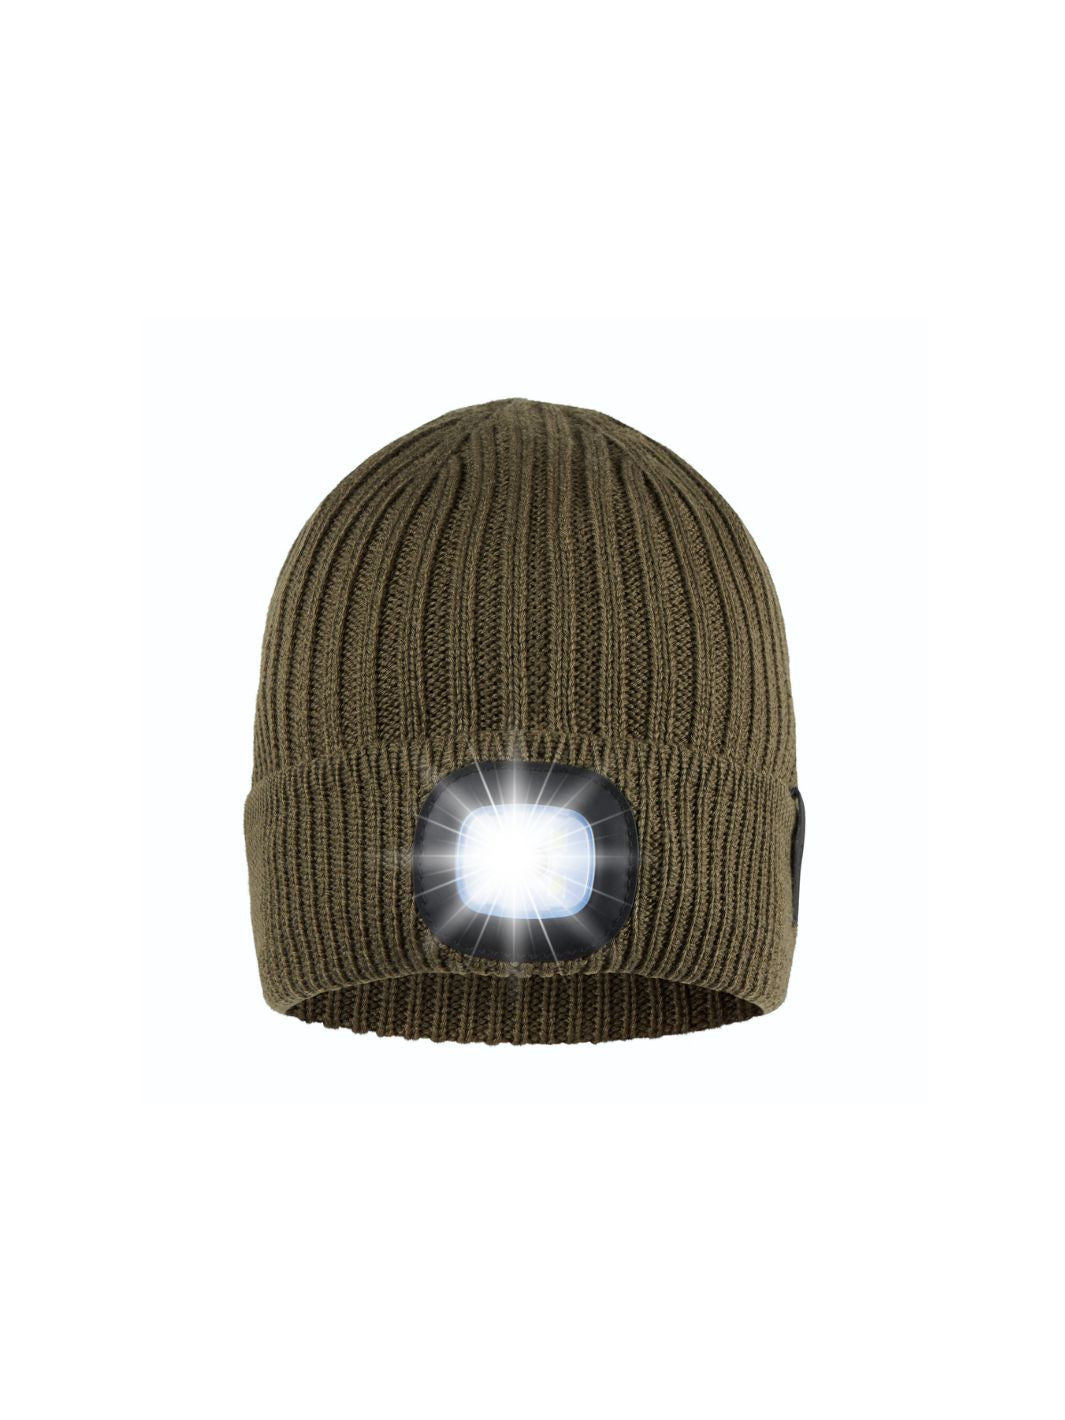 From Stable to Summit: The Unisex Wool LED Torch Beanie for Every Outdoor Enthusiast